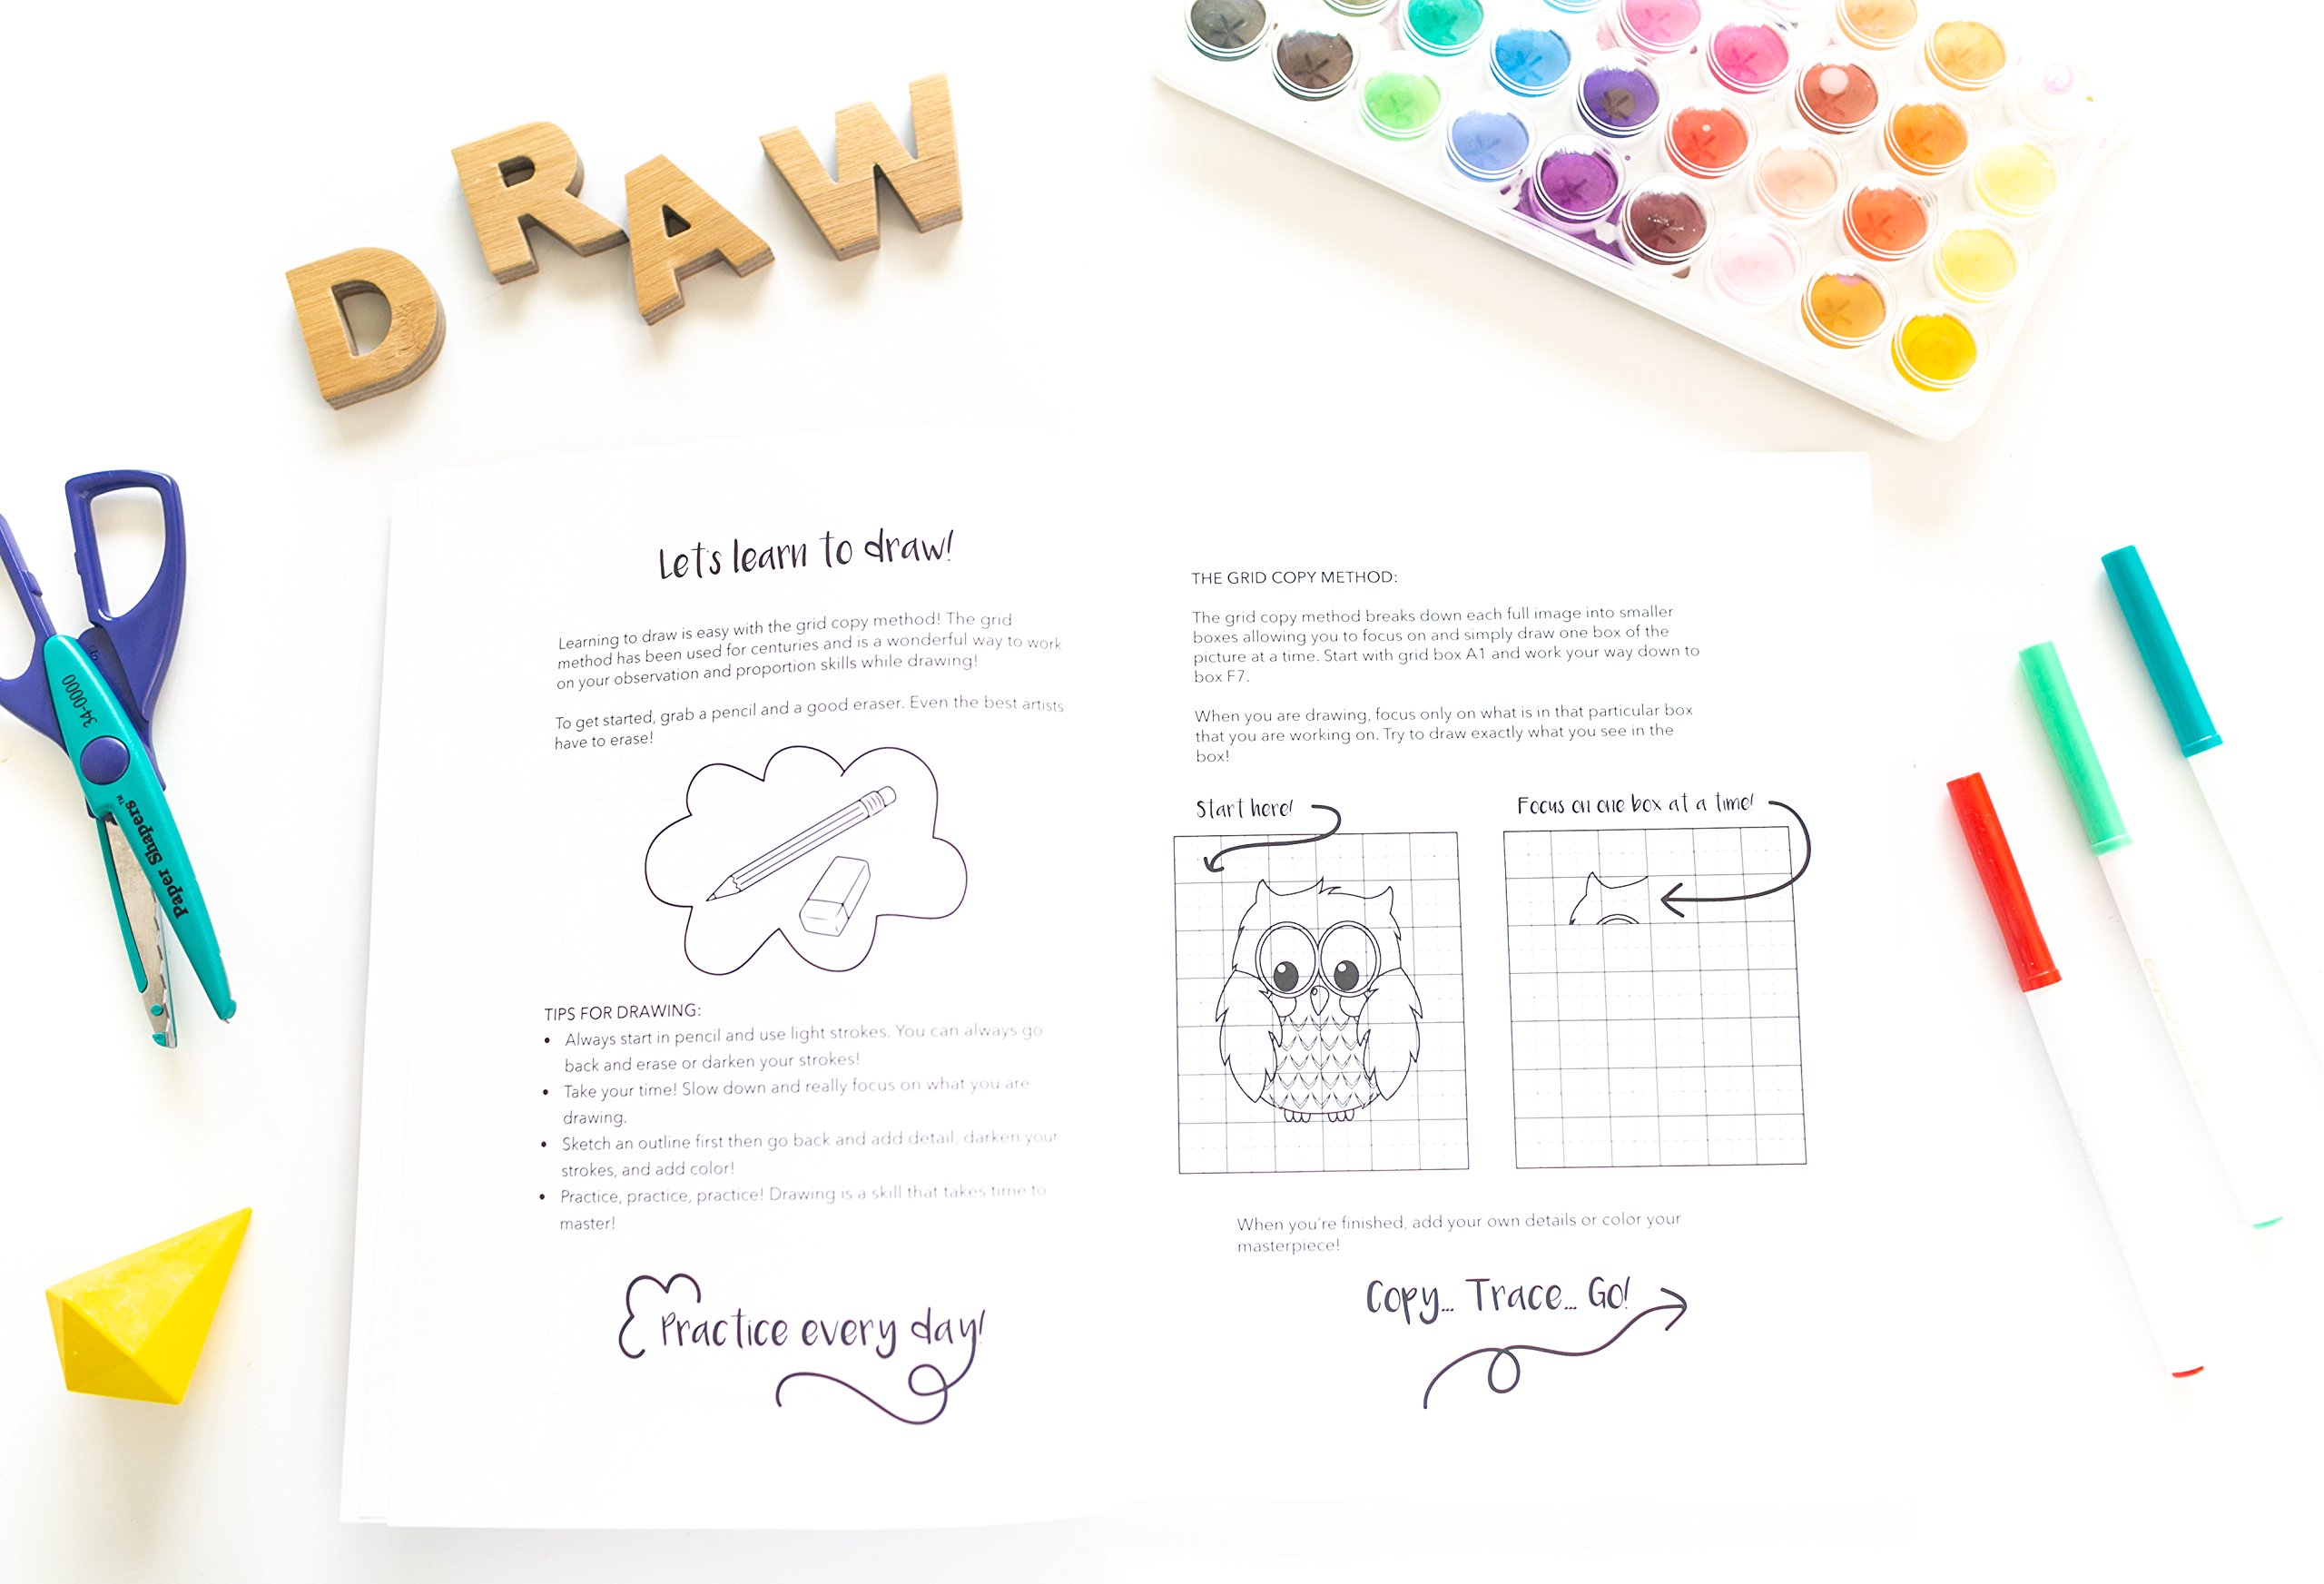 How to Draw Unicorns, Mermaids and Other Magical Friends: A Step-by-Step Drawing and Activity Book for Kids to Learn to Draw Cute Stuff